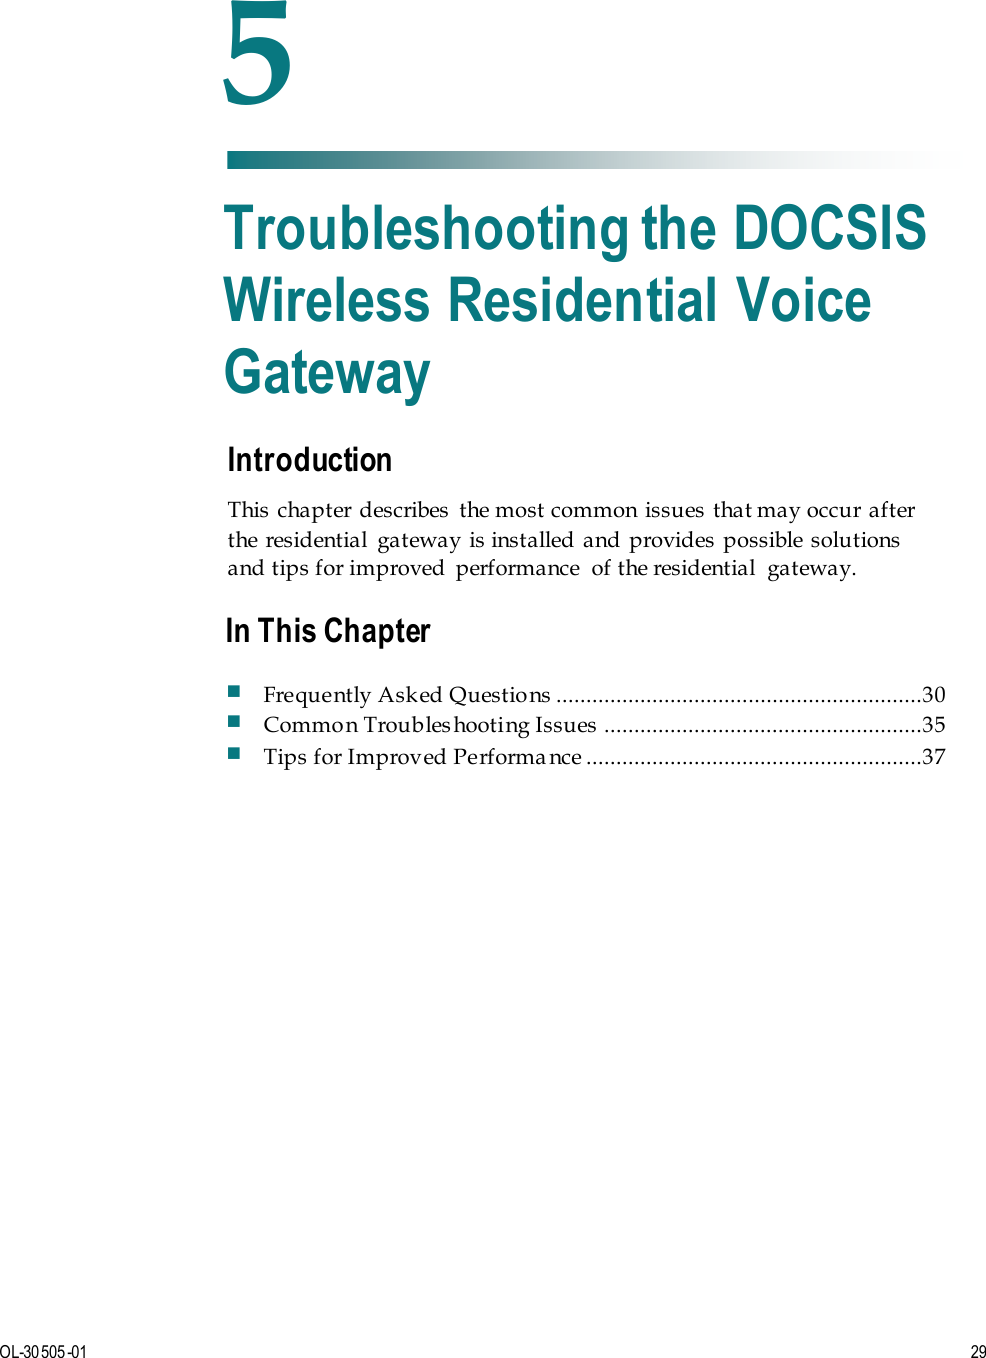   OL-30505-01 29  Introduction This  chapter  describes  the most common issues  that may occur after the residential  gateway is installed  and provides possible solutions and tips for improved  performance  of the residential  gateway.    5 Chapter 5 Troubleshooting the DOCSIS Wireless Residential Voice Gateway In This Chapter  Frequently Asked Questions  .............................................................30  Common Troubleshooting Issues  .....................................................35  Tips for Improved Performa nce ........................................................37 